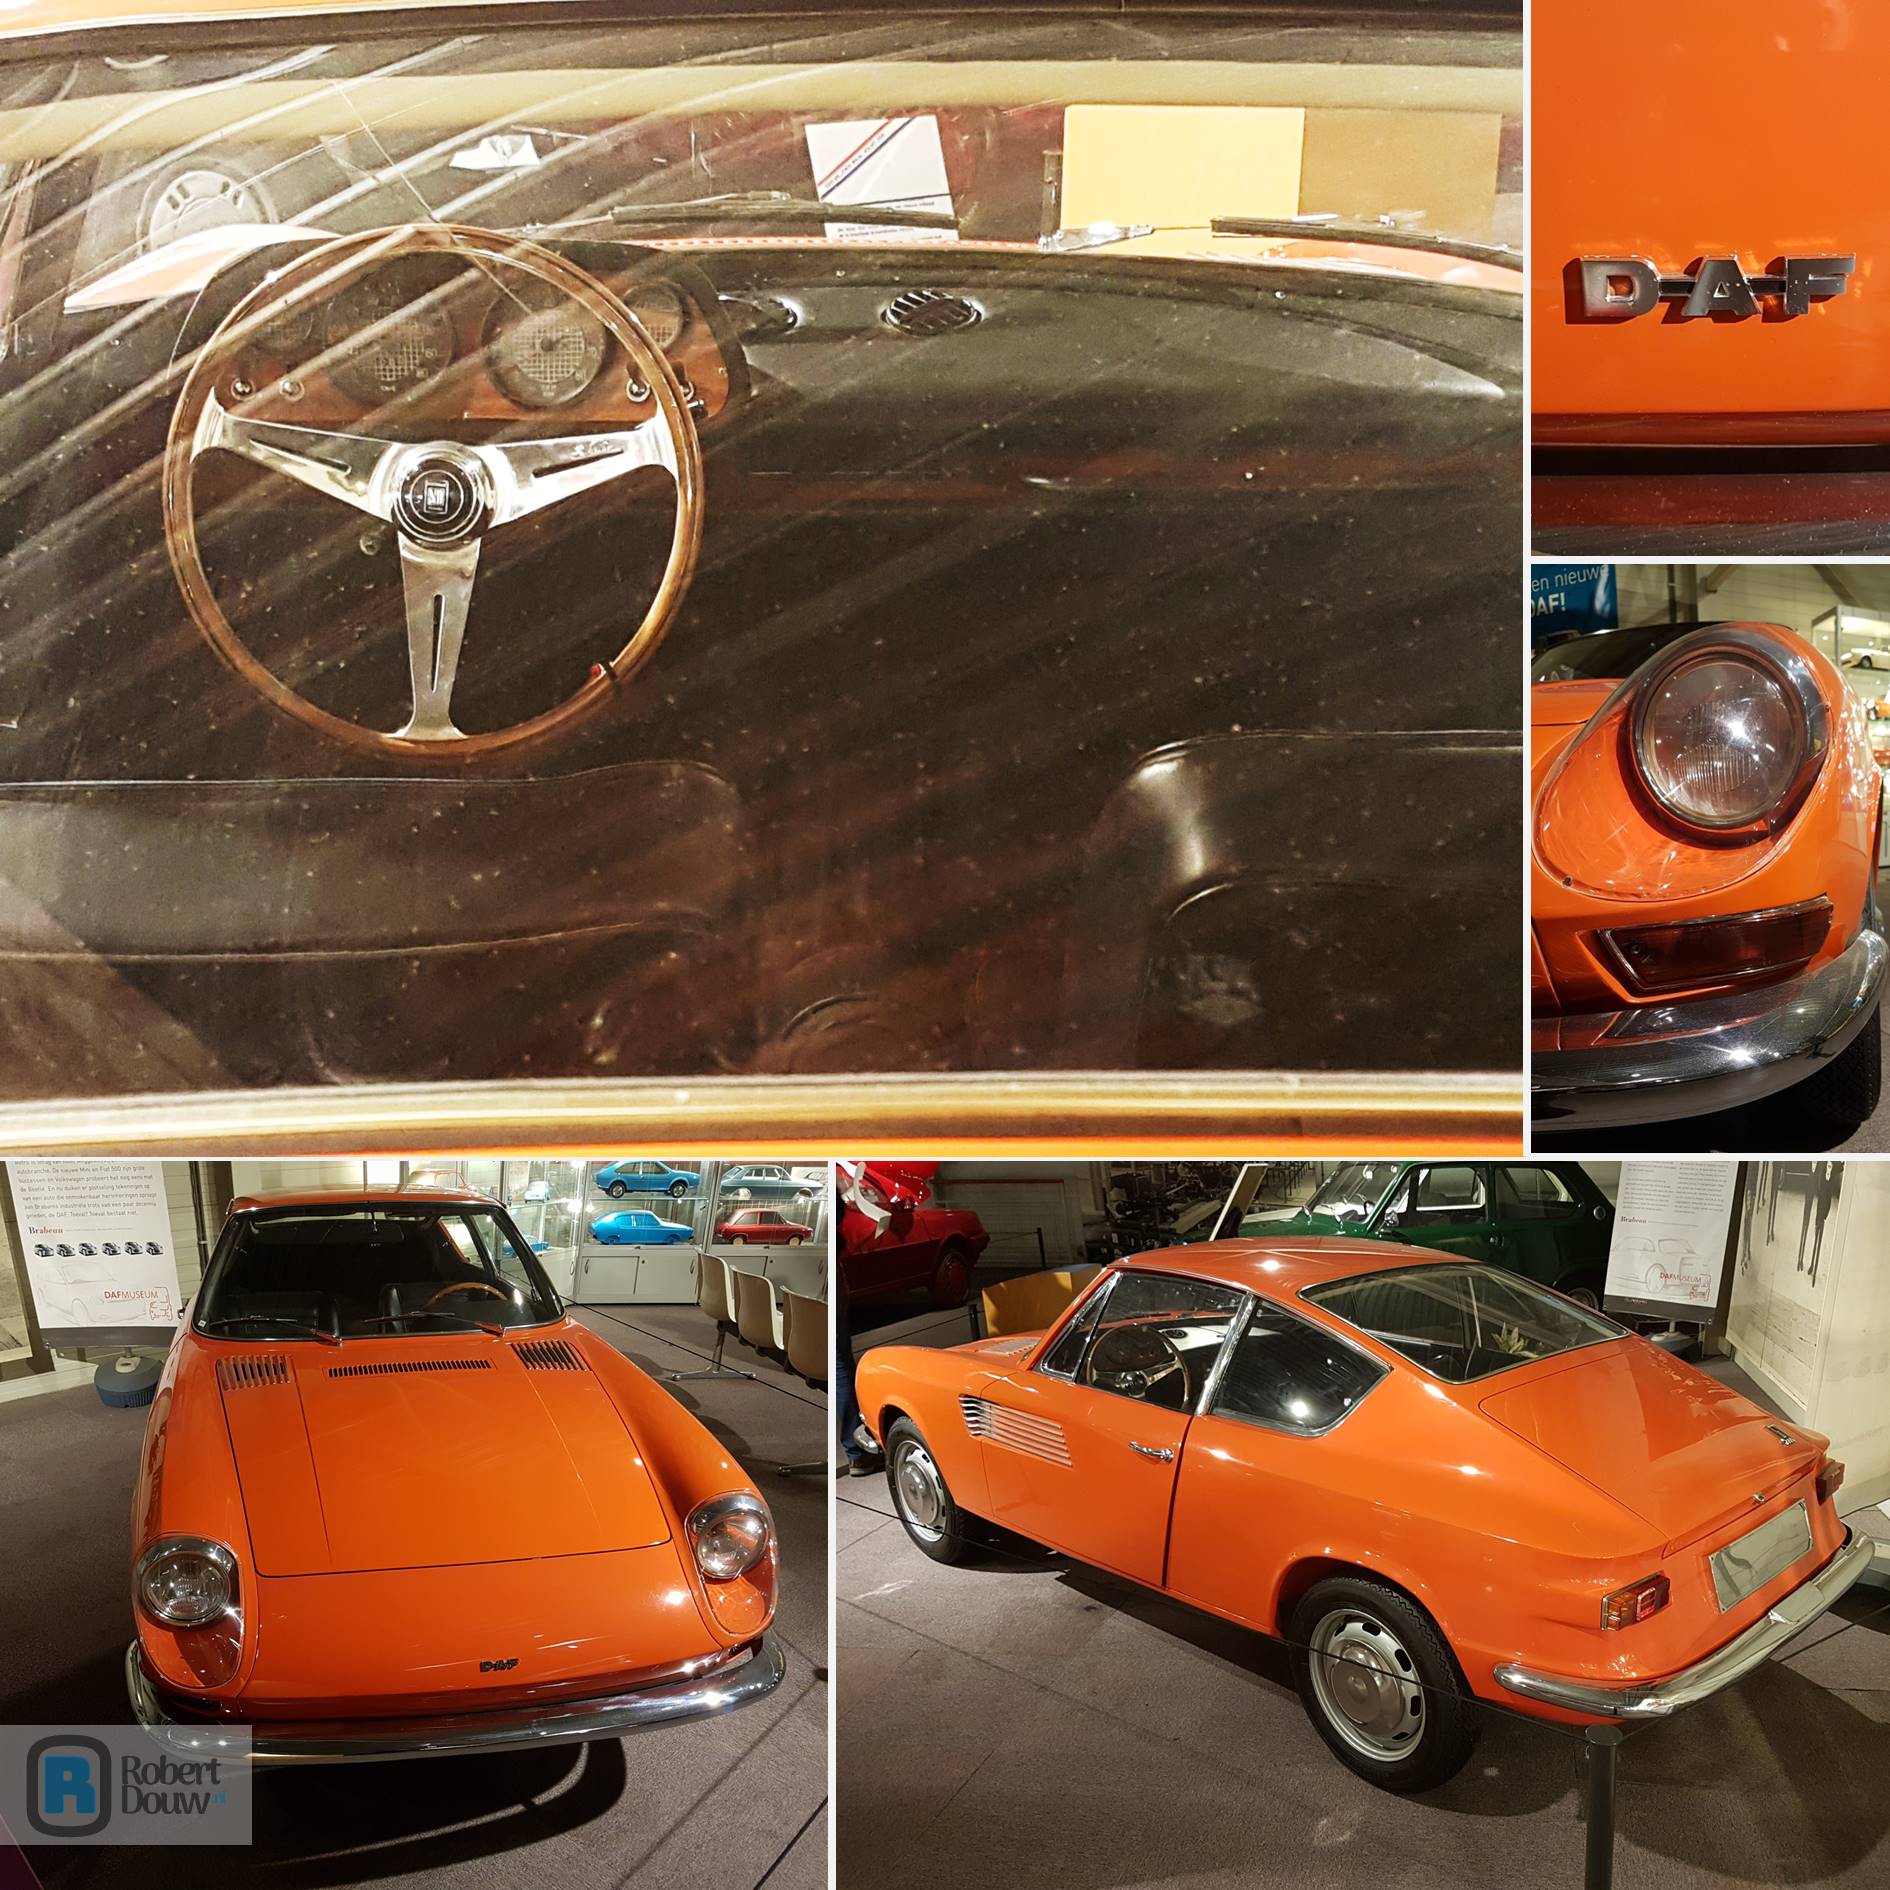 Five photos of the interior and exterior of a car in a museum.